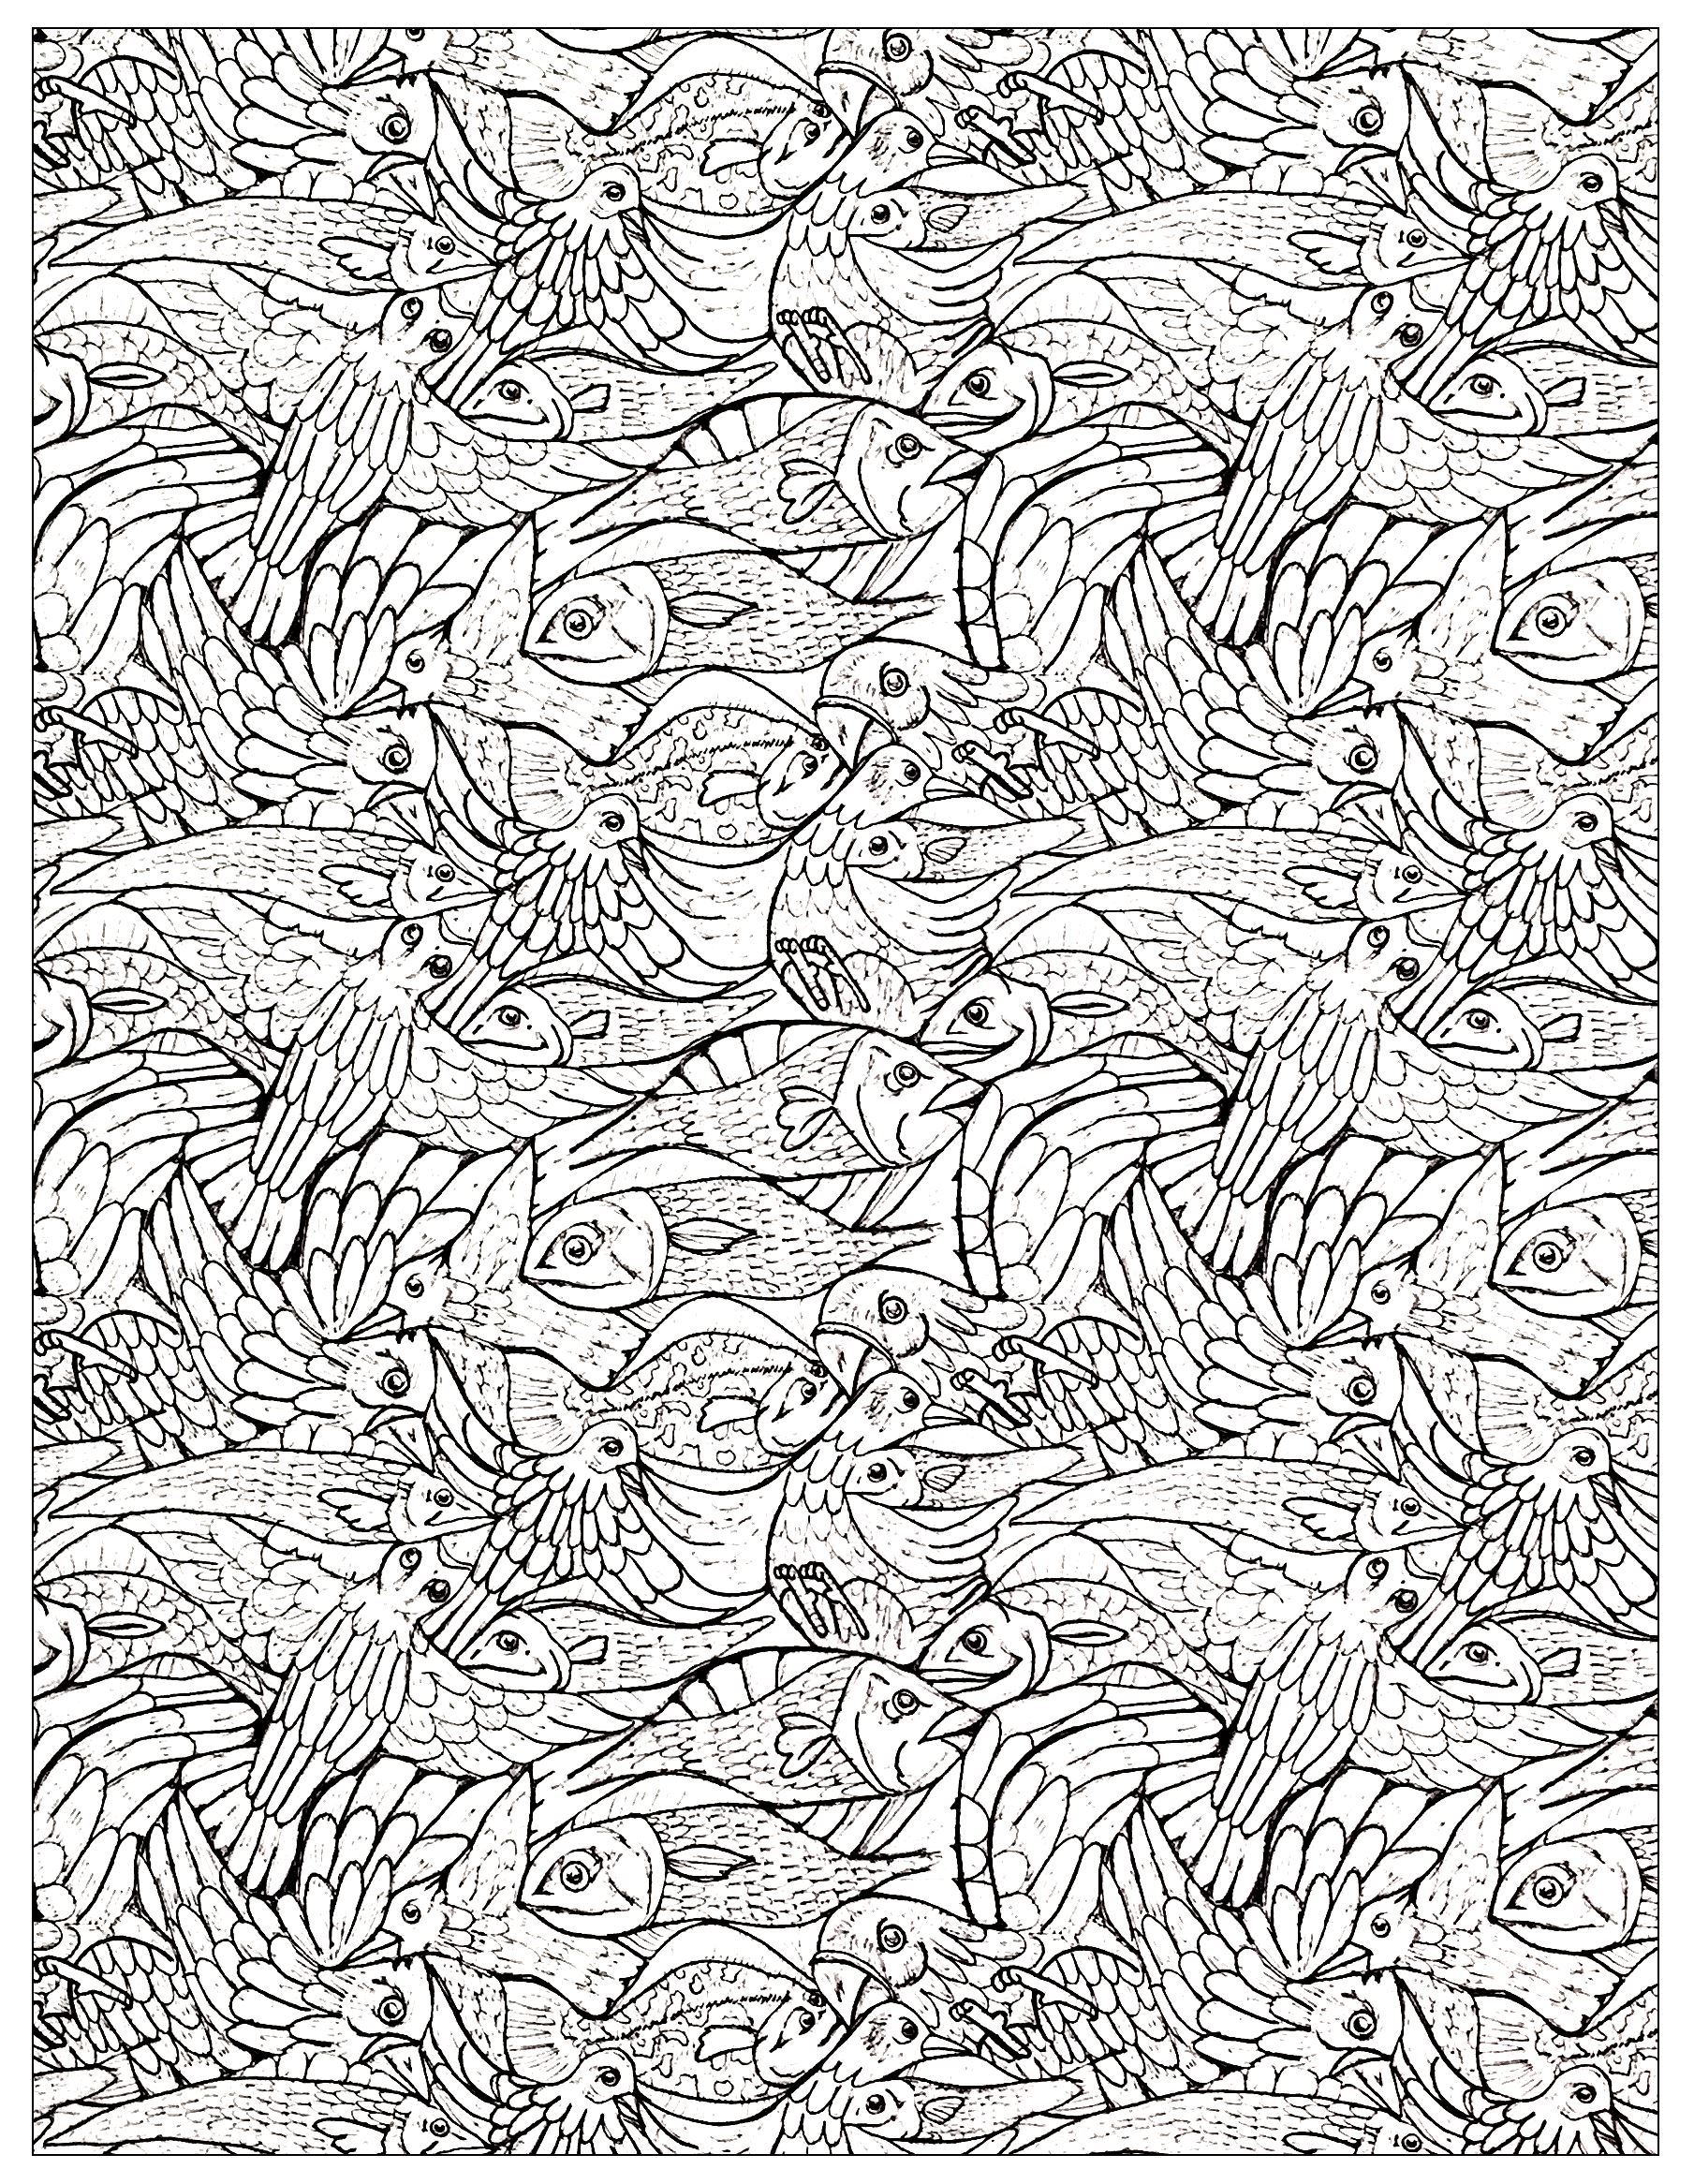 image=animaux coloriage adulte poissons 2 1